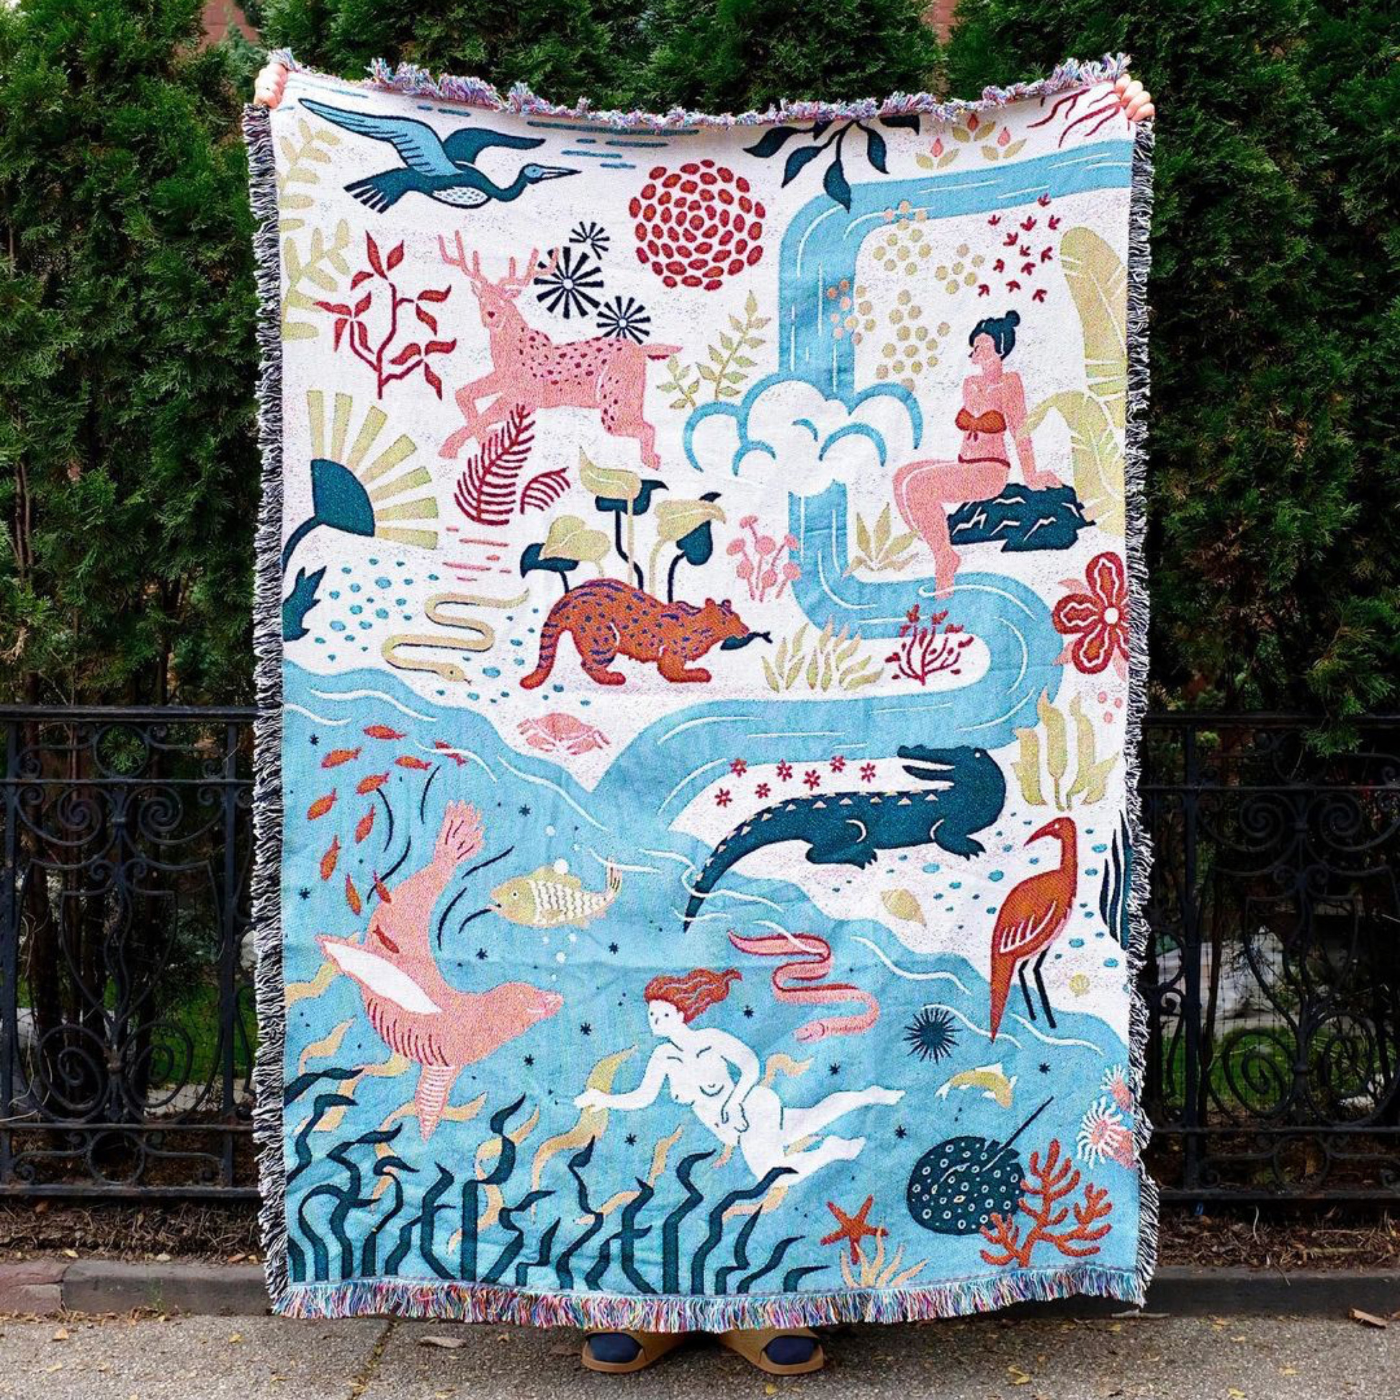 A throw blanket is displayed in front of some tall green shrubs. The top right half has a white background and the bottom left half has a blue background. The top right half features a person sitting on a rock in an orange bikini, a pink deer, a blue heron-like bird flying in the air, green branches, an alligator and more. A small stream starts in the top right-hand corner and pools down into the bottom left-hand side, where a mermaid swims with kelp, a seal, fish and small ocean wildlife.